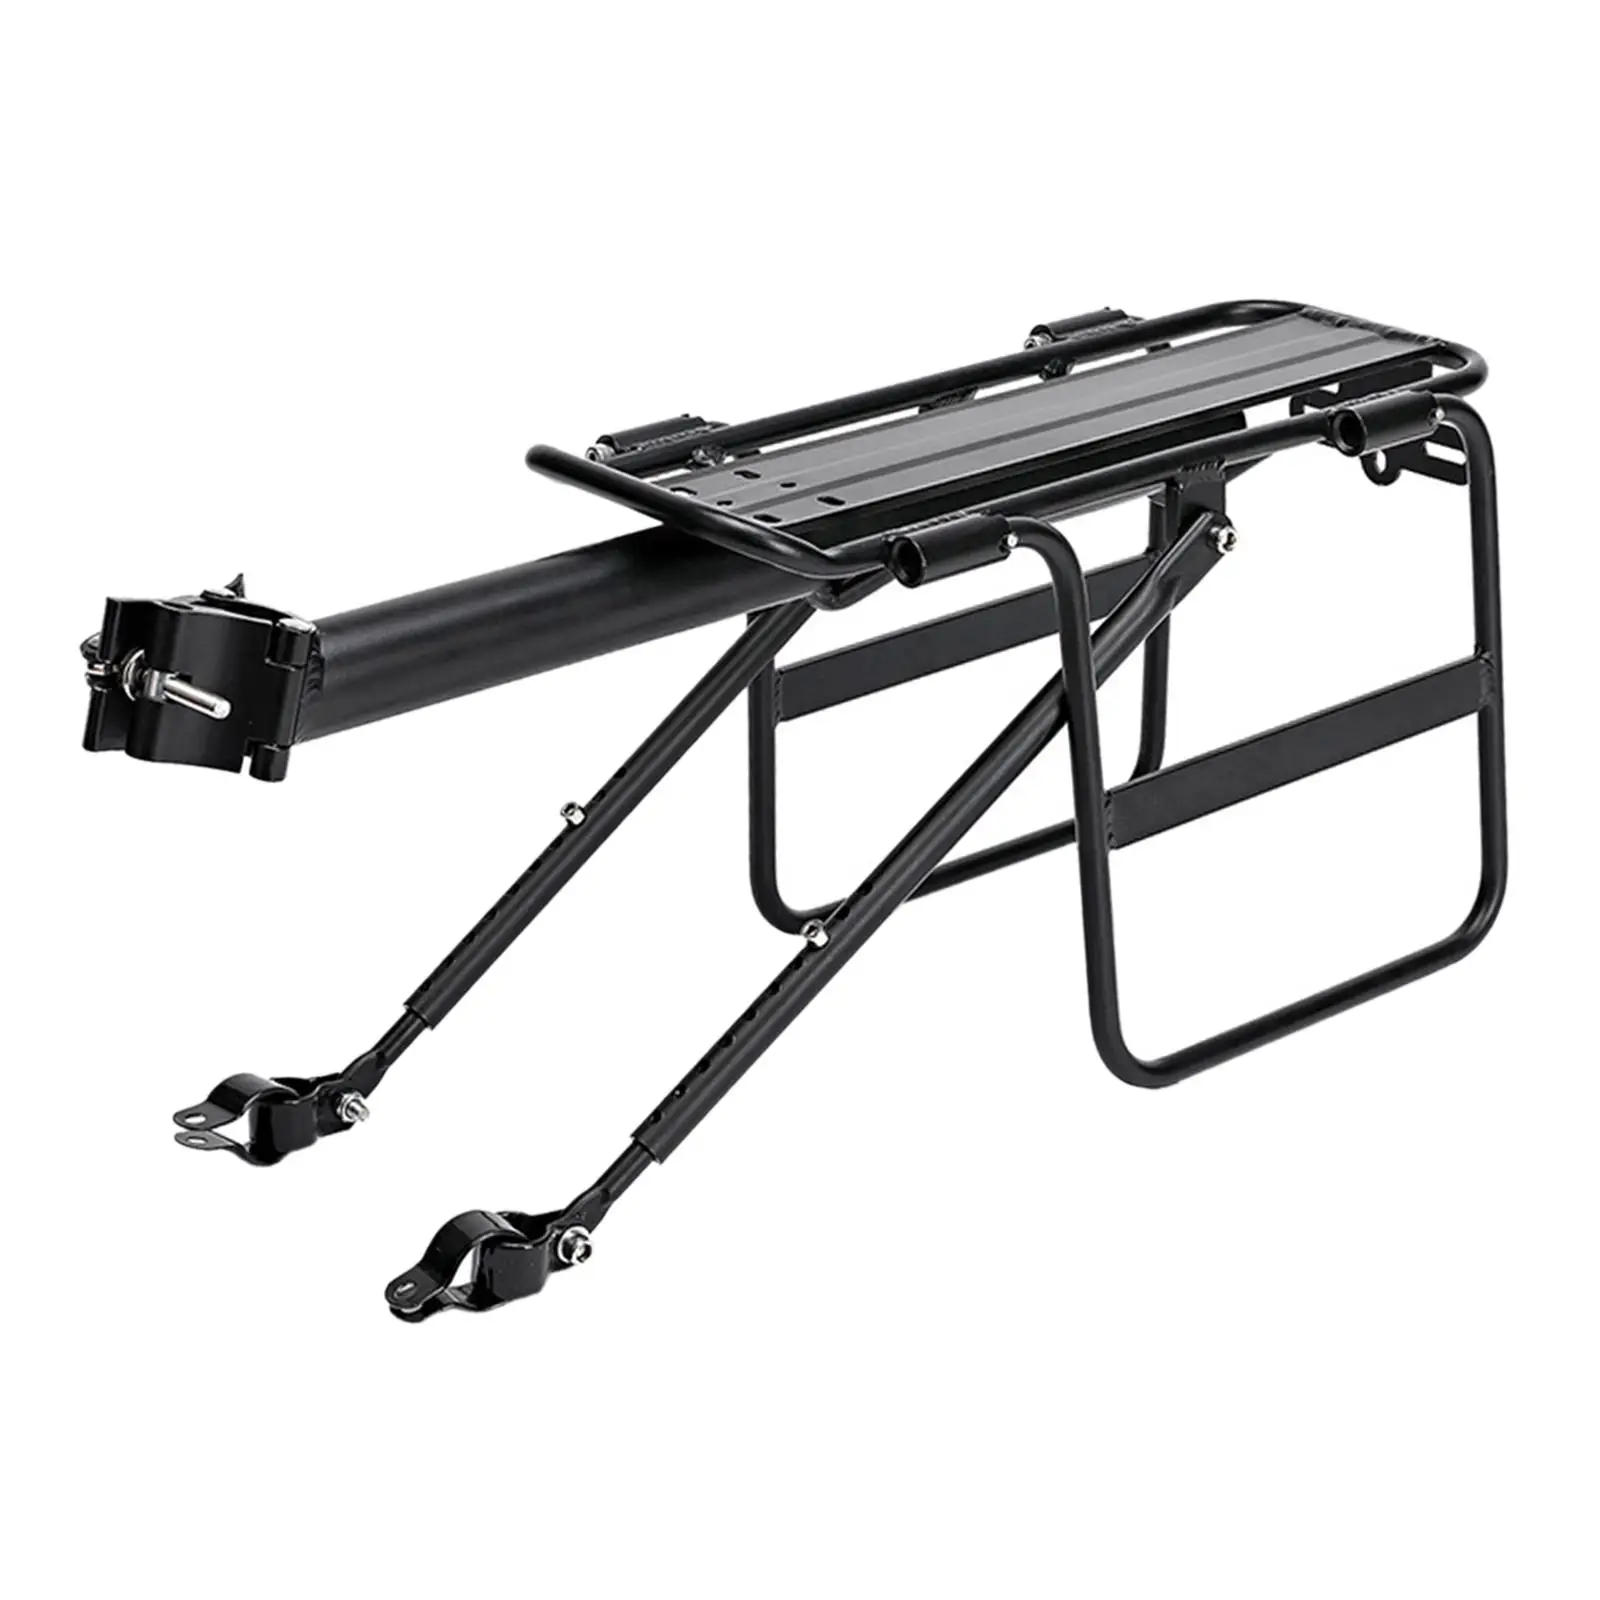 Rear Bike Rack Aluminum Alloy W/ Extended wing Tailstock Holder Carrier  Rear Luggage Cargo Rack for Luggage Road Bike